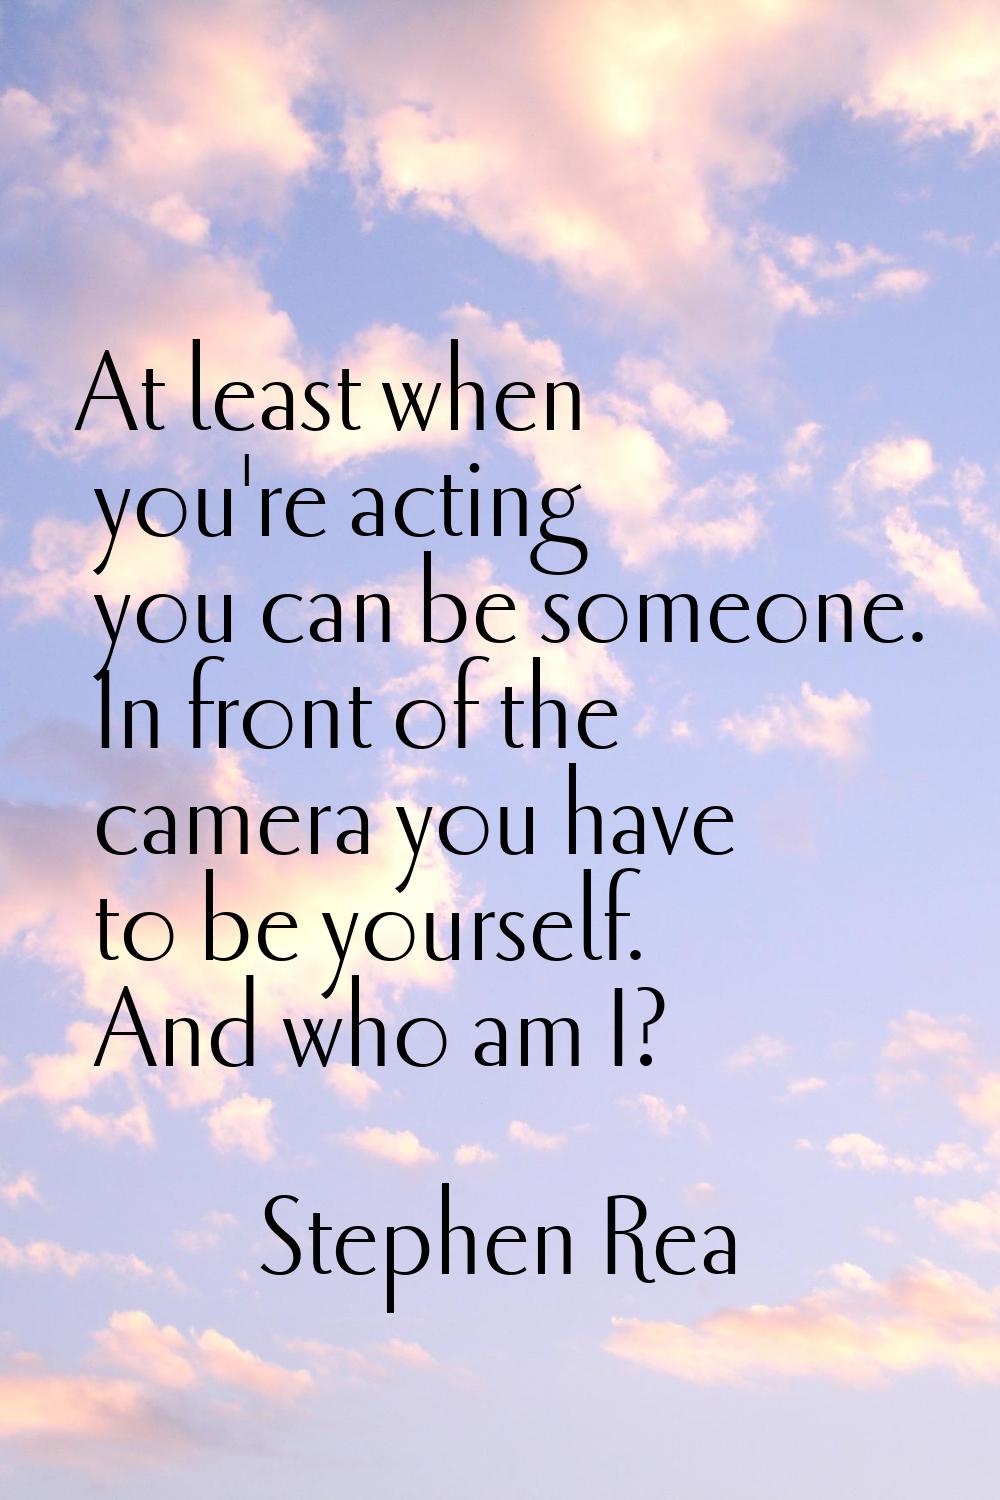 At least when you're acting you can be someone. In front of the camera you have to be yourself. And